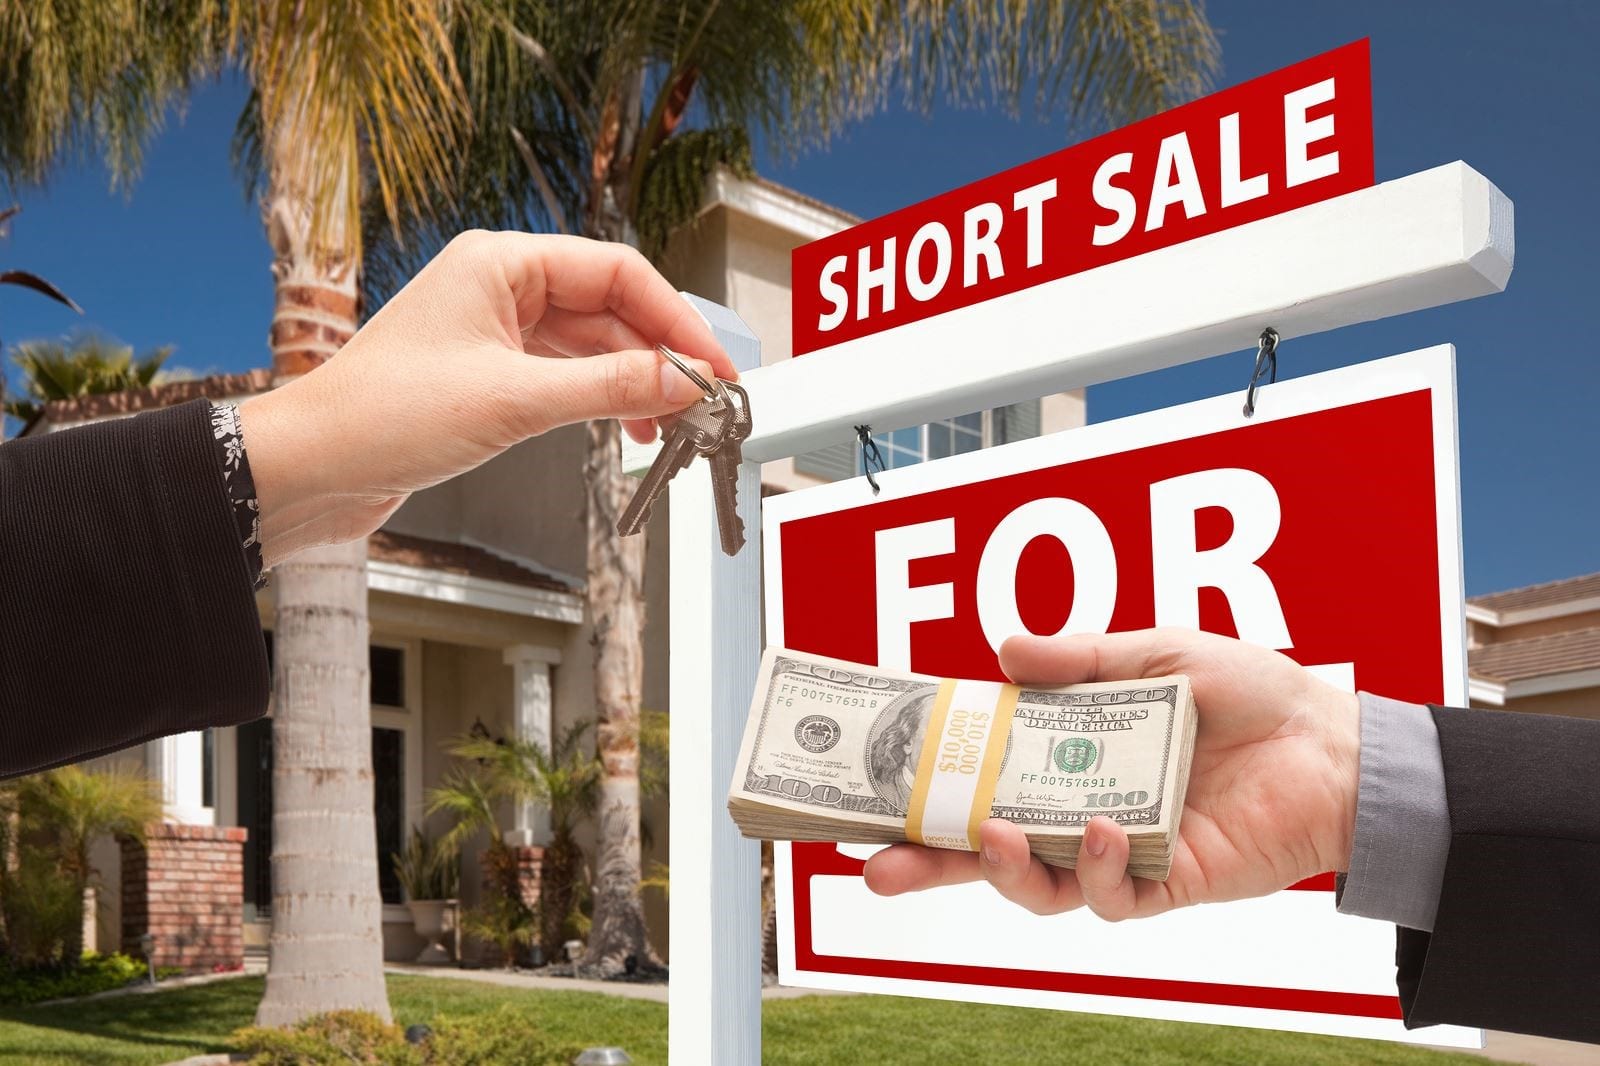 short sales in real estate investing